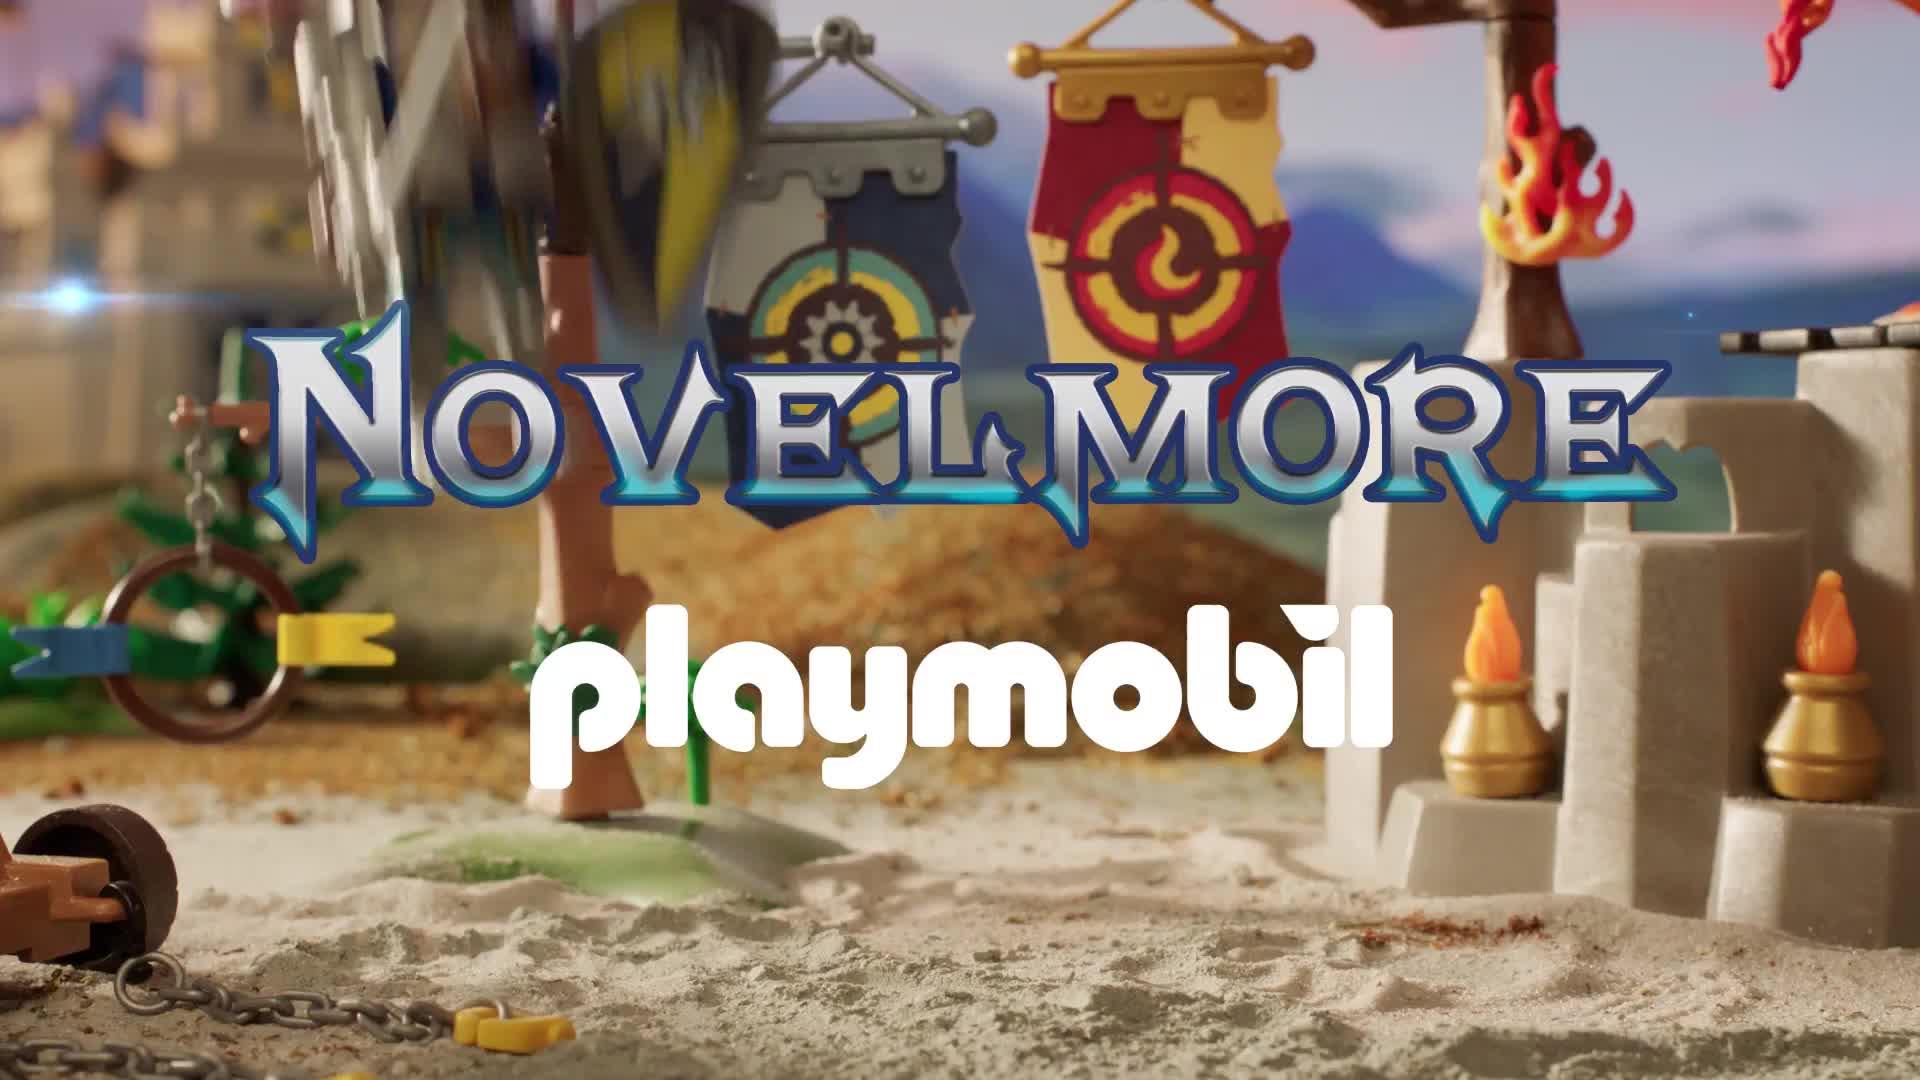 Welcome to the world of Novelmore by PLAYMOBIL